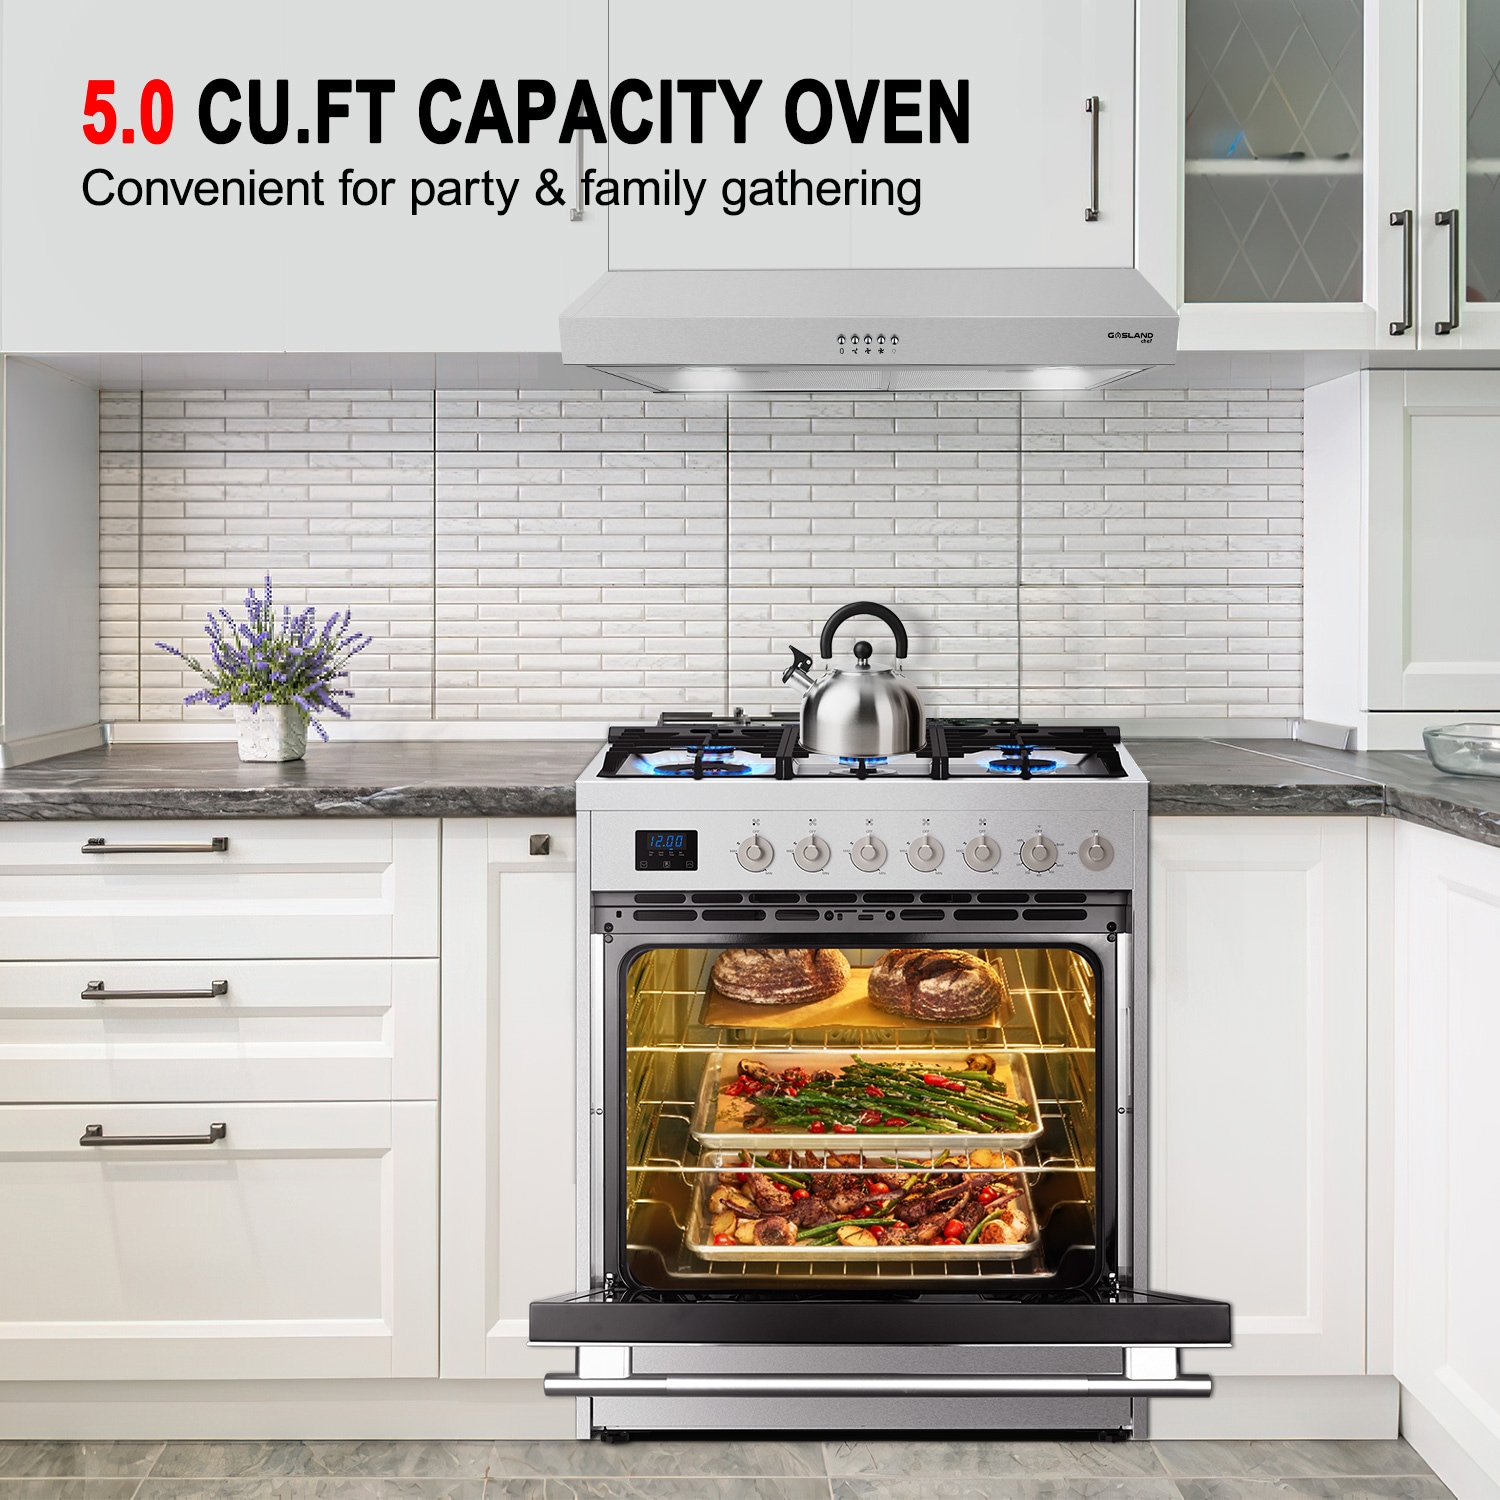 Gasland Chef 30'' Slide-In GAS Range Stove with 5 Burners, 5.0 Cu. ft. Capacity Convection Oven